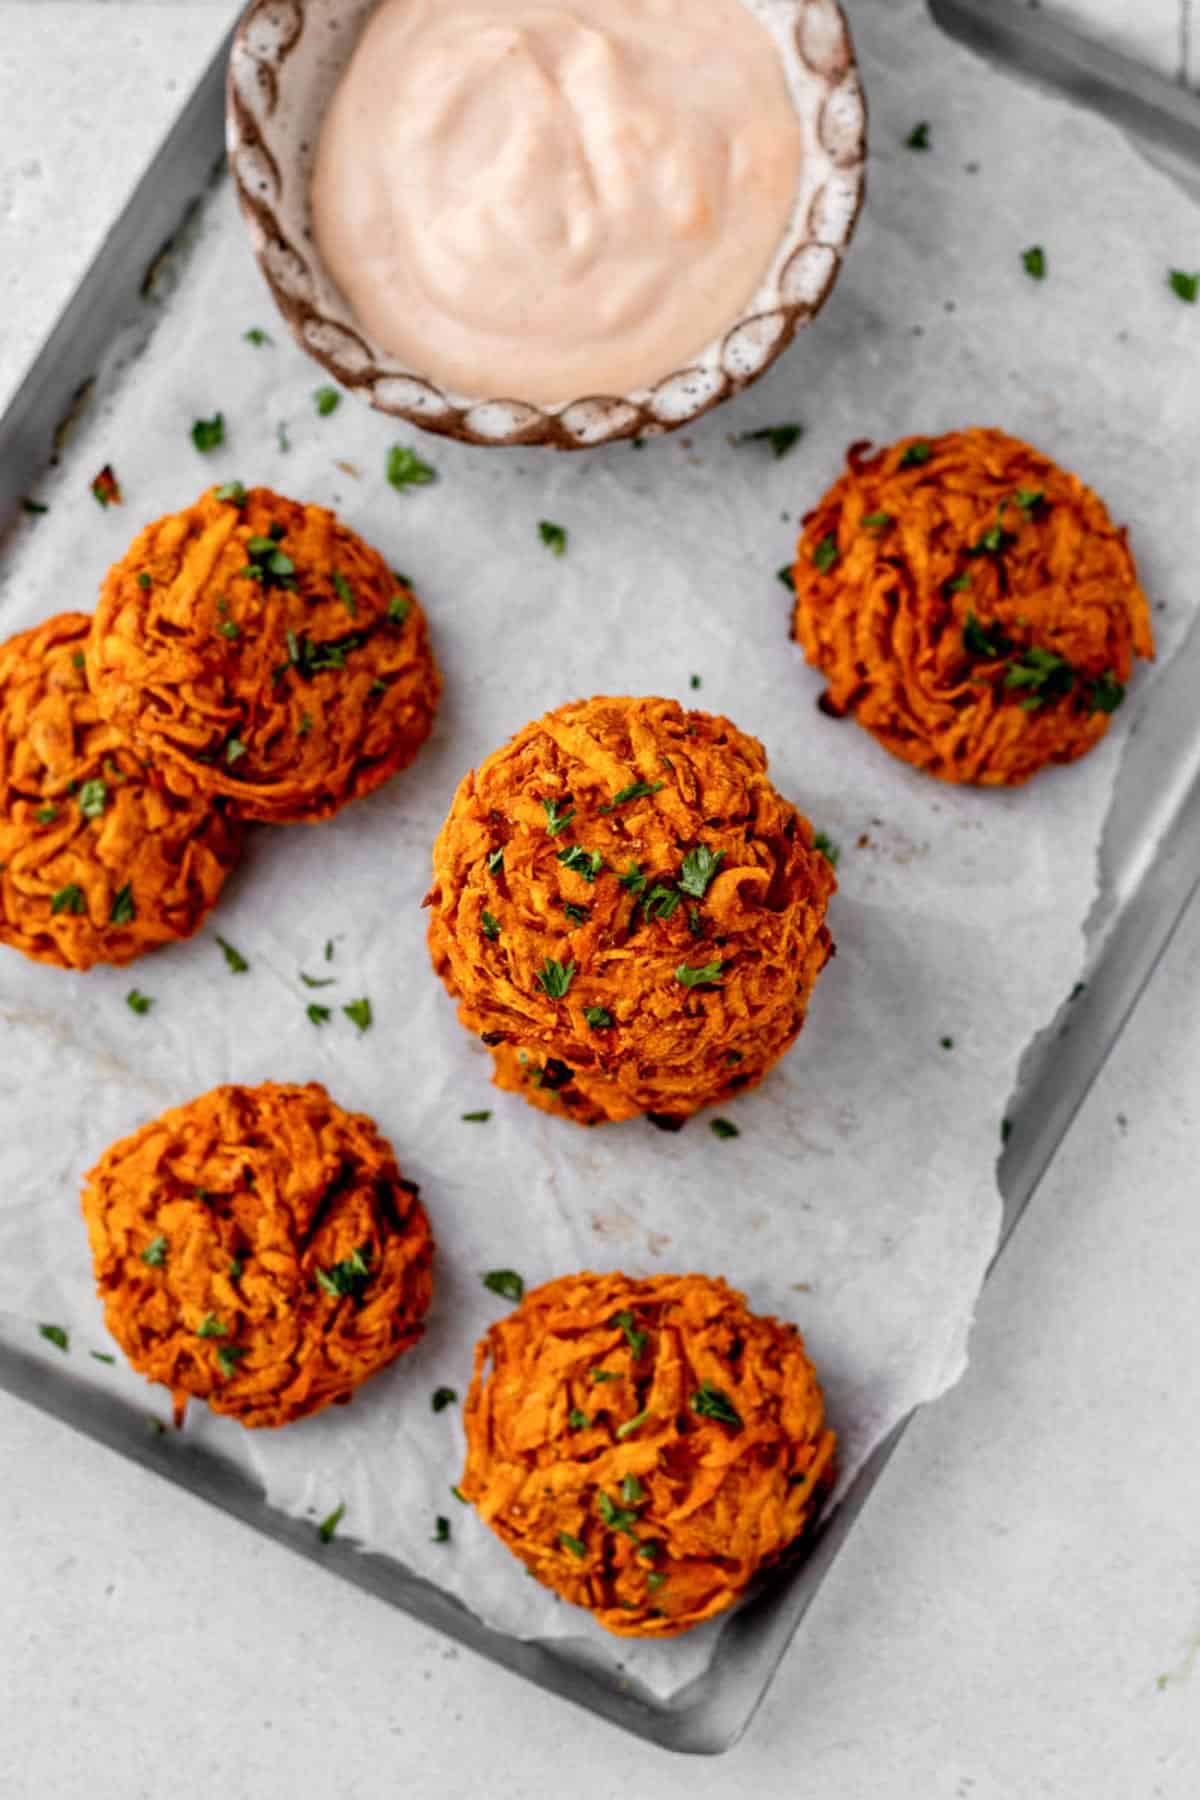 Baked sweet potato fritters and a small bowl of a creamy dipping sauce.